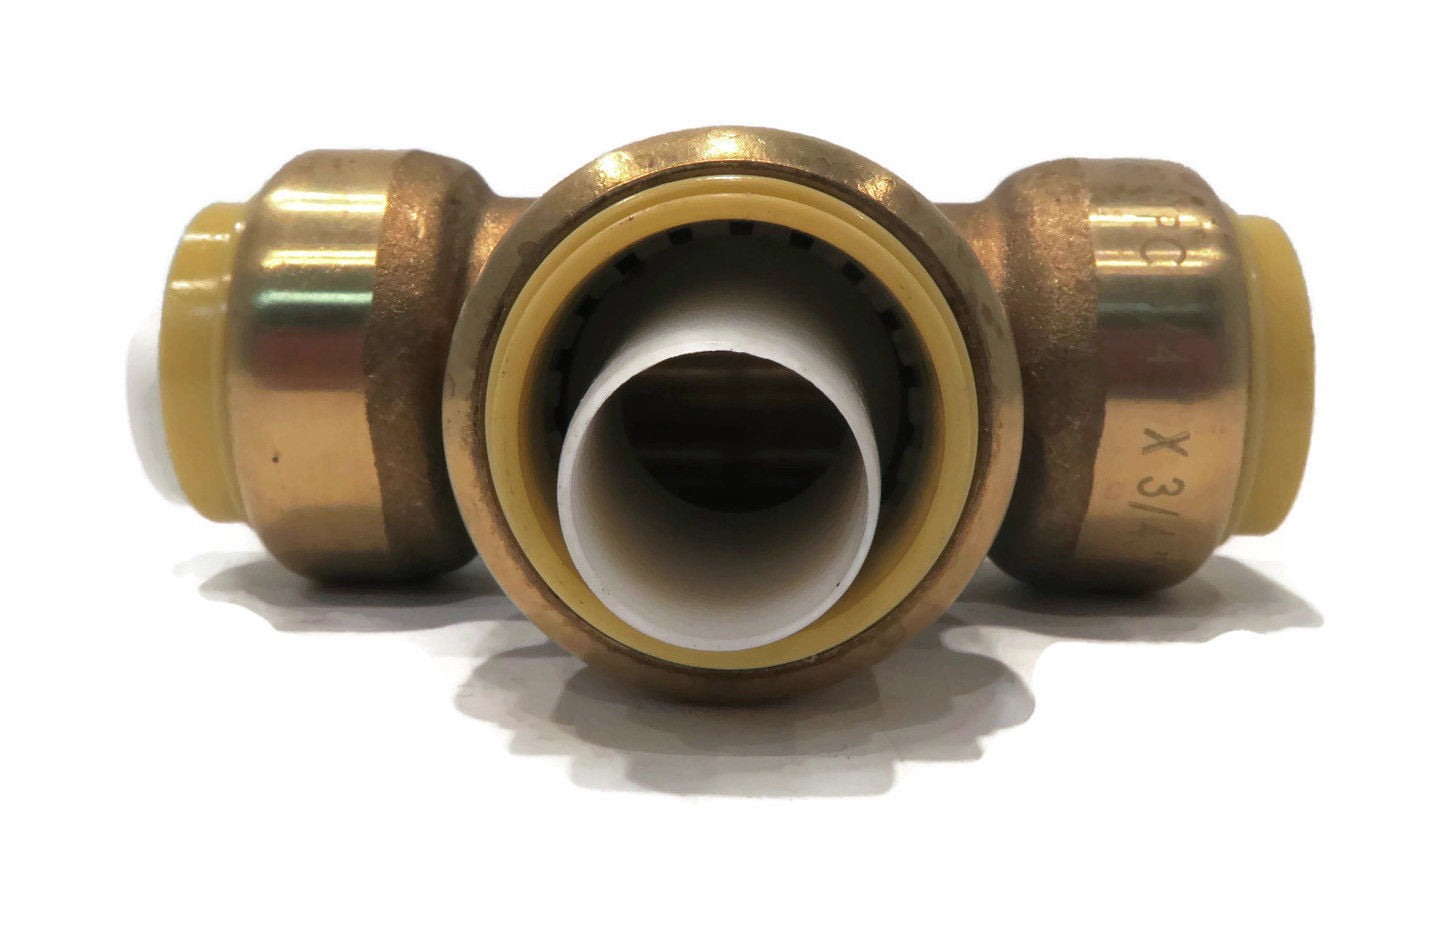 New 3/4" Shark Bite Style LEAD FREE BRASS TEES Fitting replace Nibco PX20010 8 